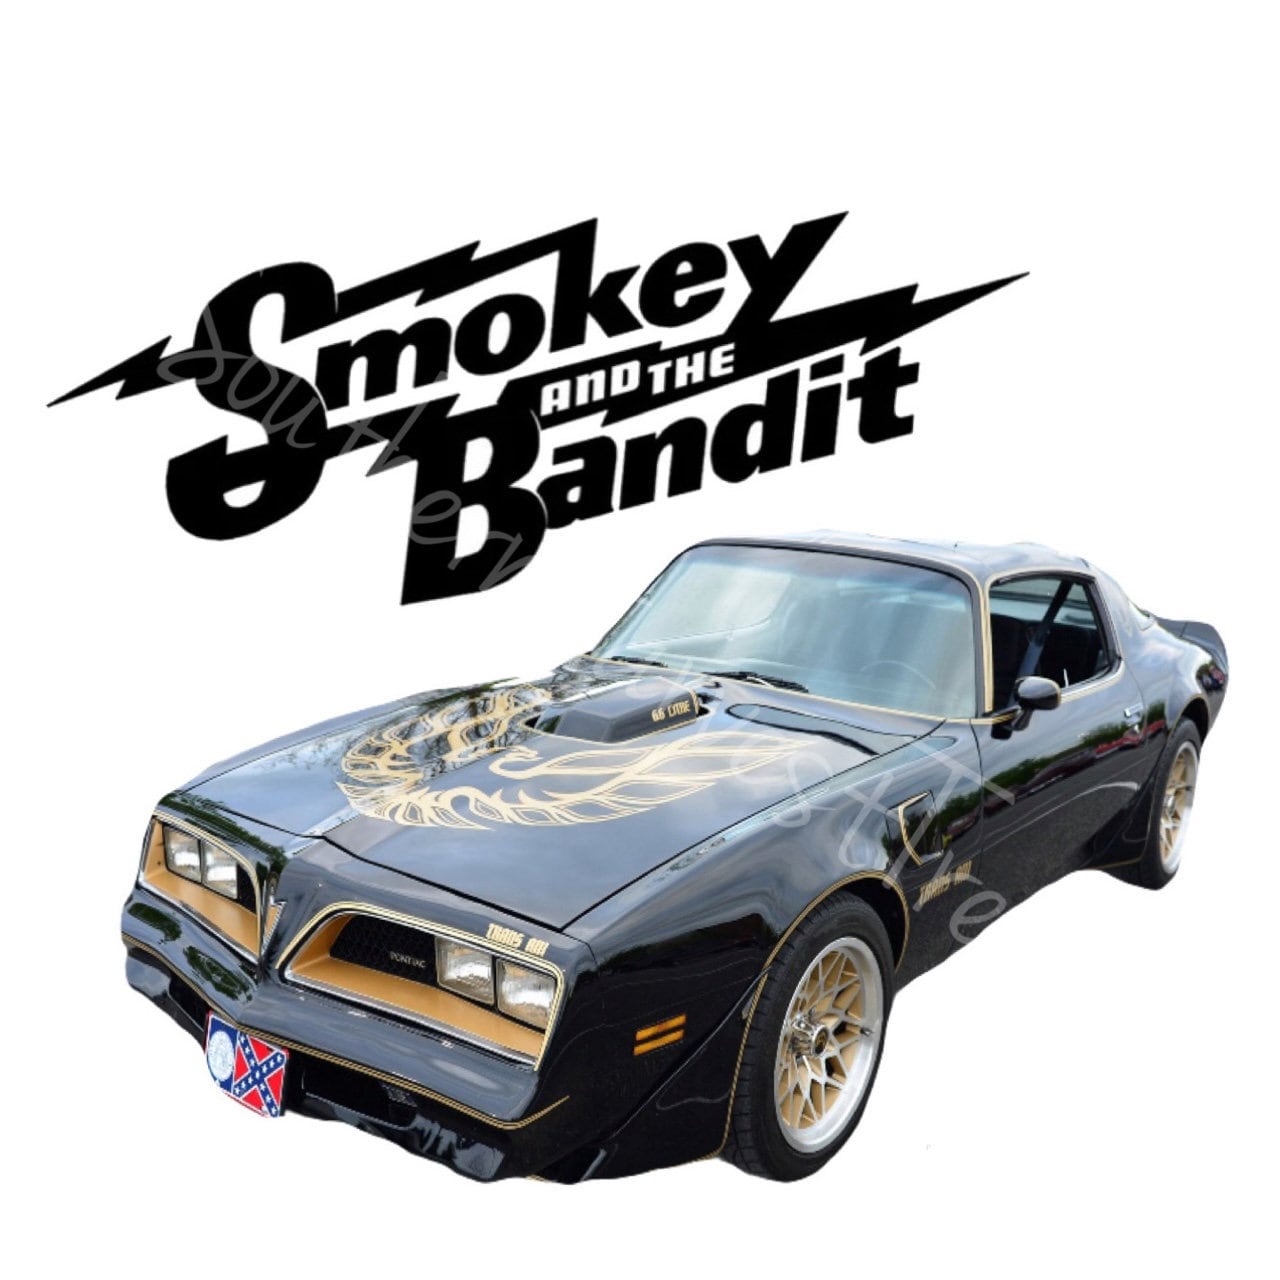 Smokey And The Bandit Jpeg Instant Download Sublimation Etsy